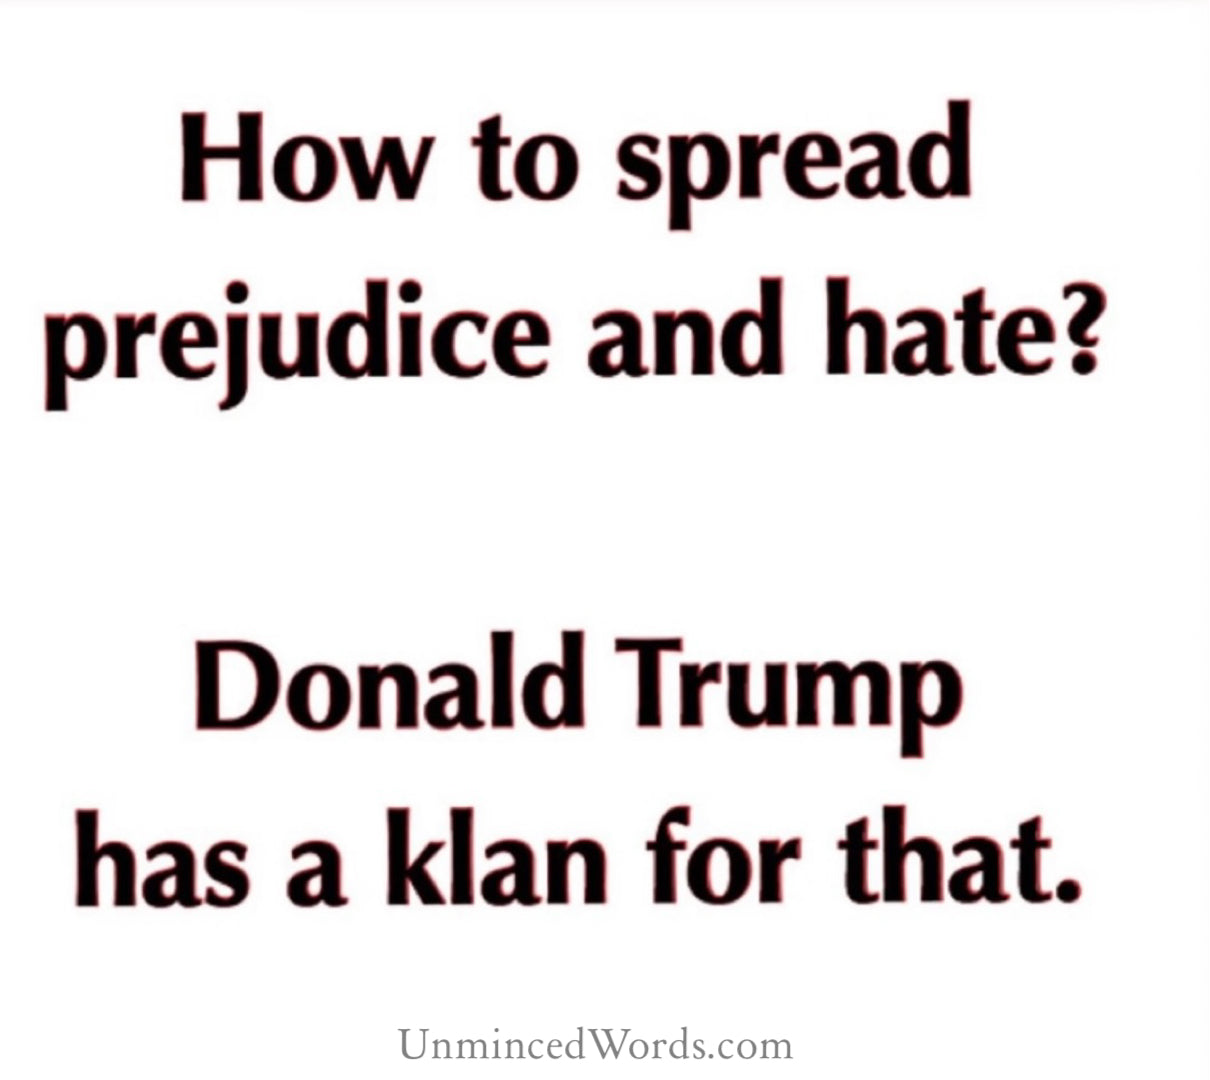 How To Spread Prejudice And Hate? Donald Trump Has A Klan For That